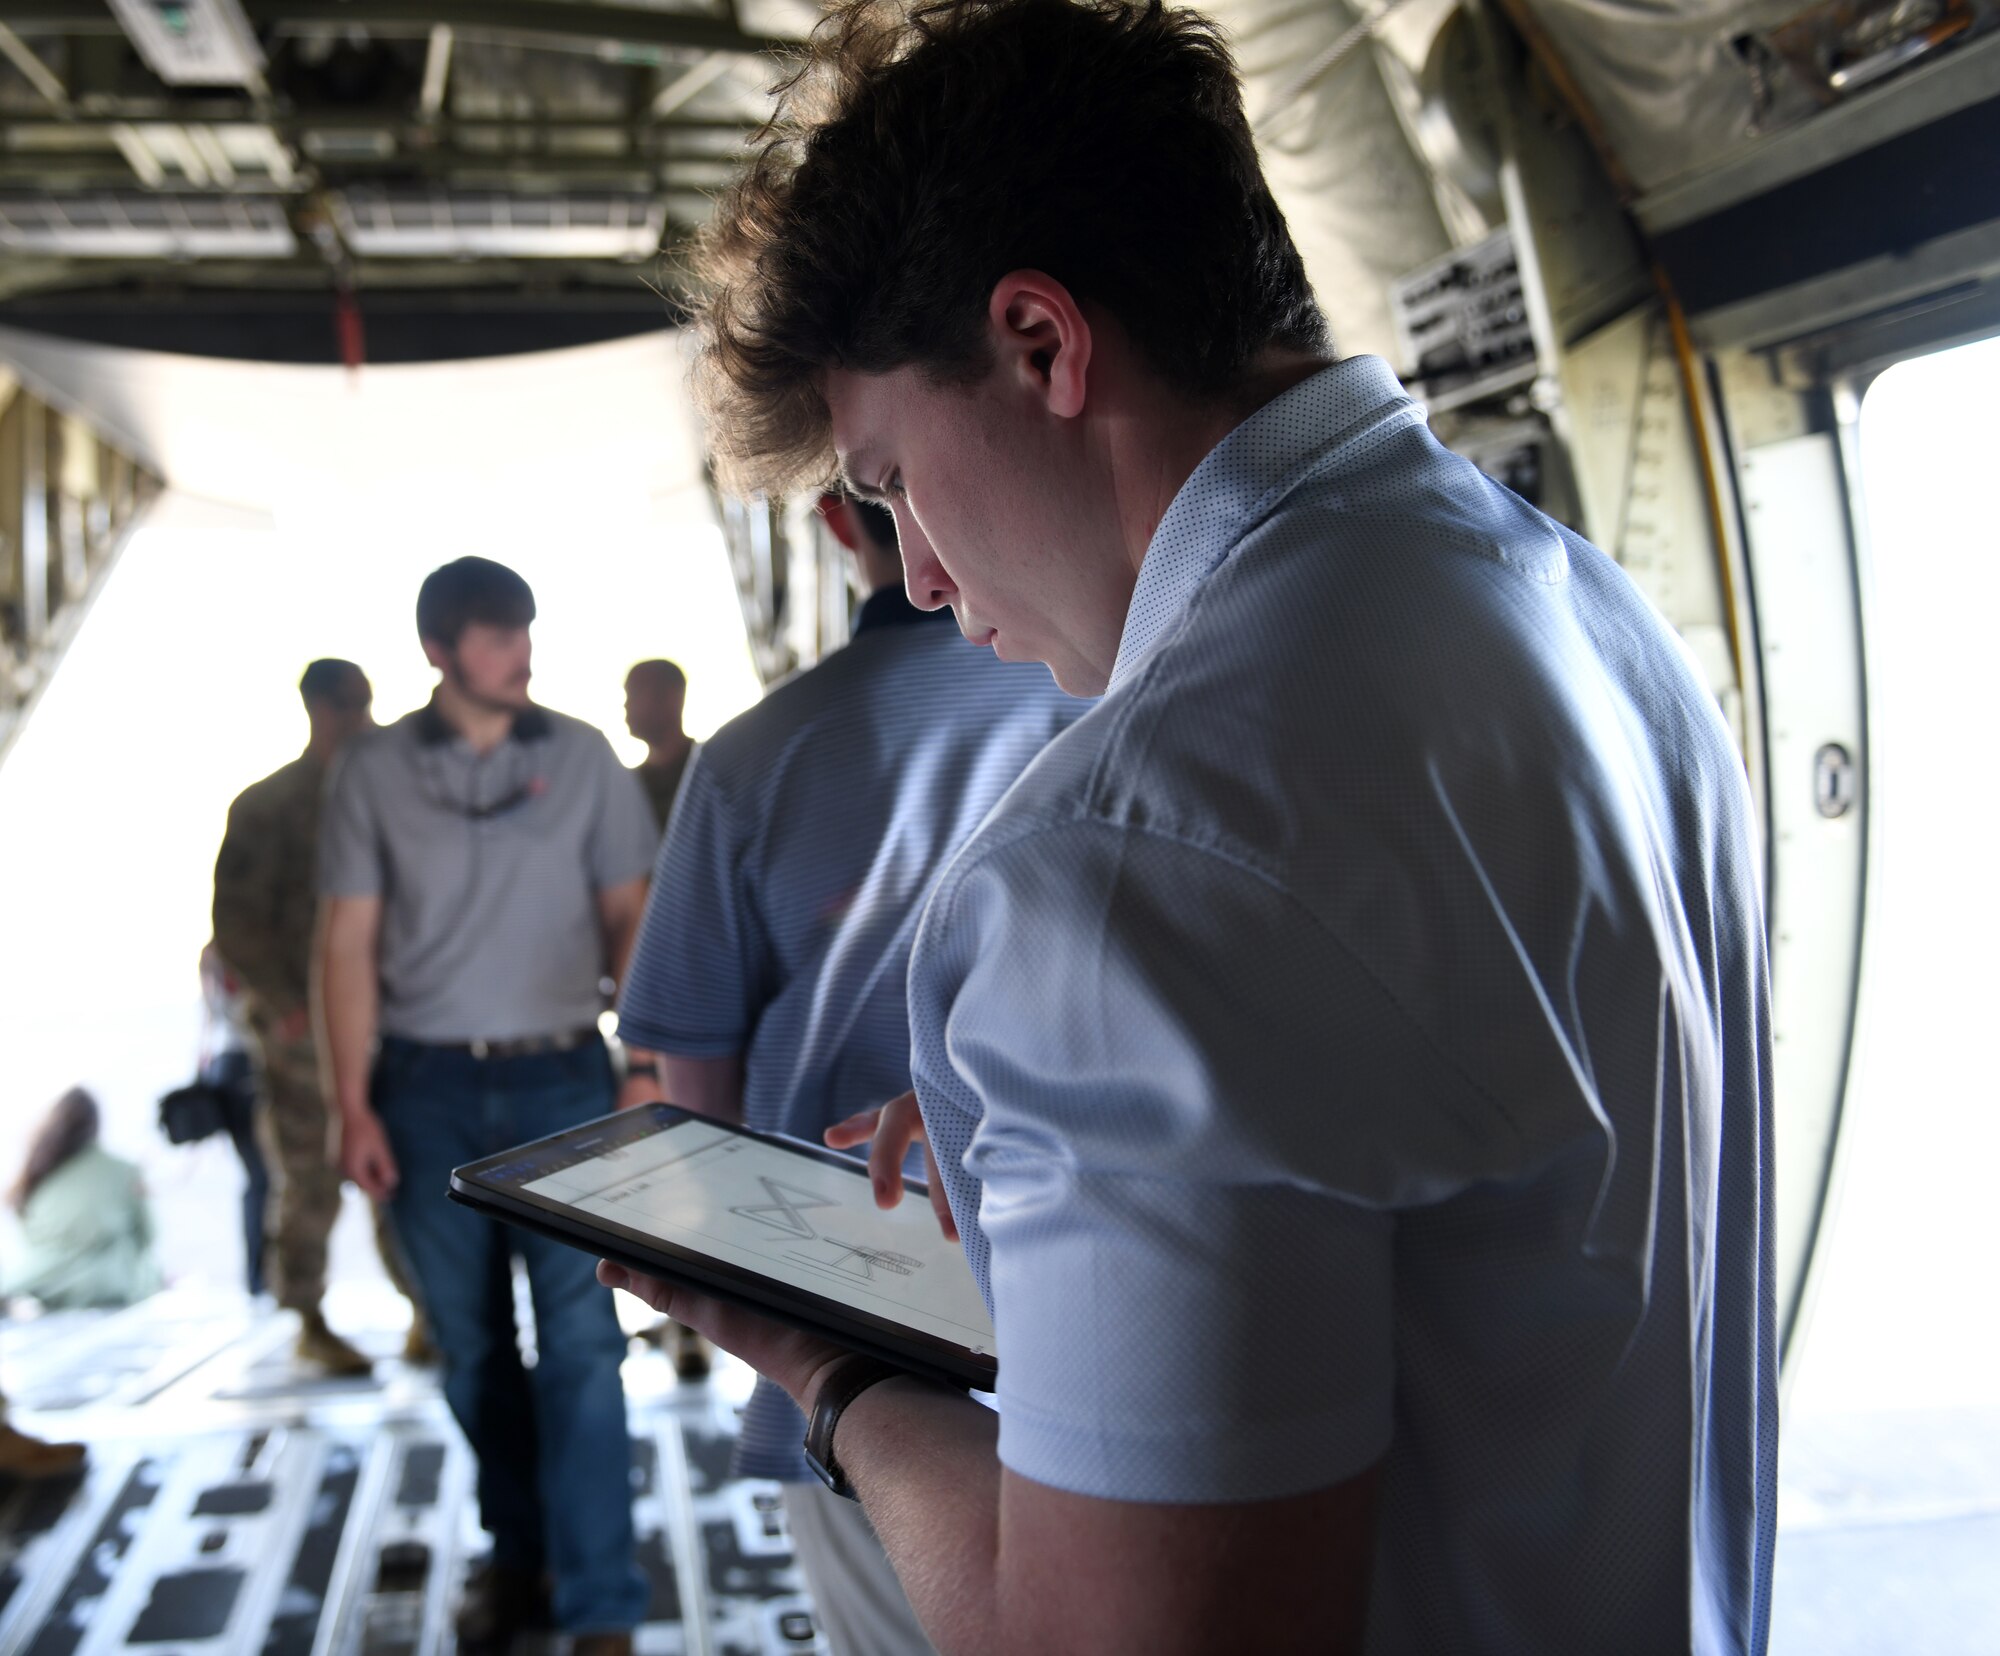 An Auburn University engineering student studies aircraft parts for research Feb 16, 2022 at Maxwell Air Force Base, Al. Air University’s Innovation Center and MGMWERX partnered with the 187th Fighter Wing and the 908th airlift wing to provide Auburn University students with a C-130 loading demo and C-17 static. (U.S. Air Force photo by Senior Airman Rhonda Smith)